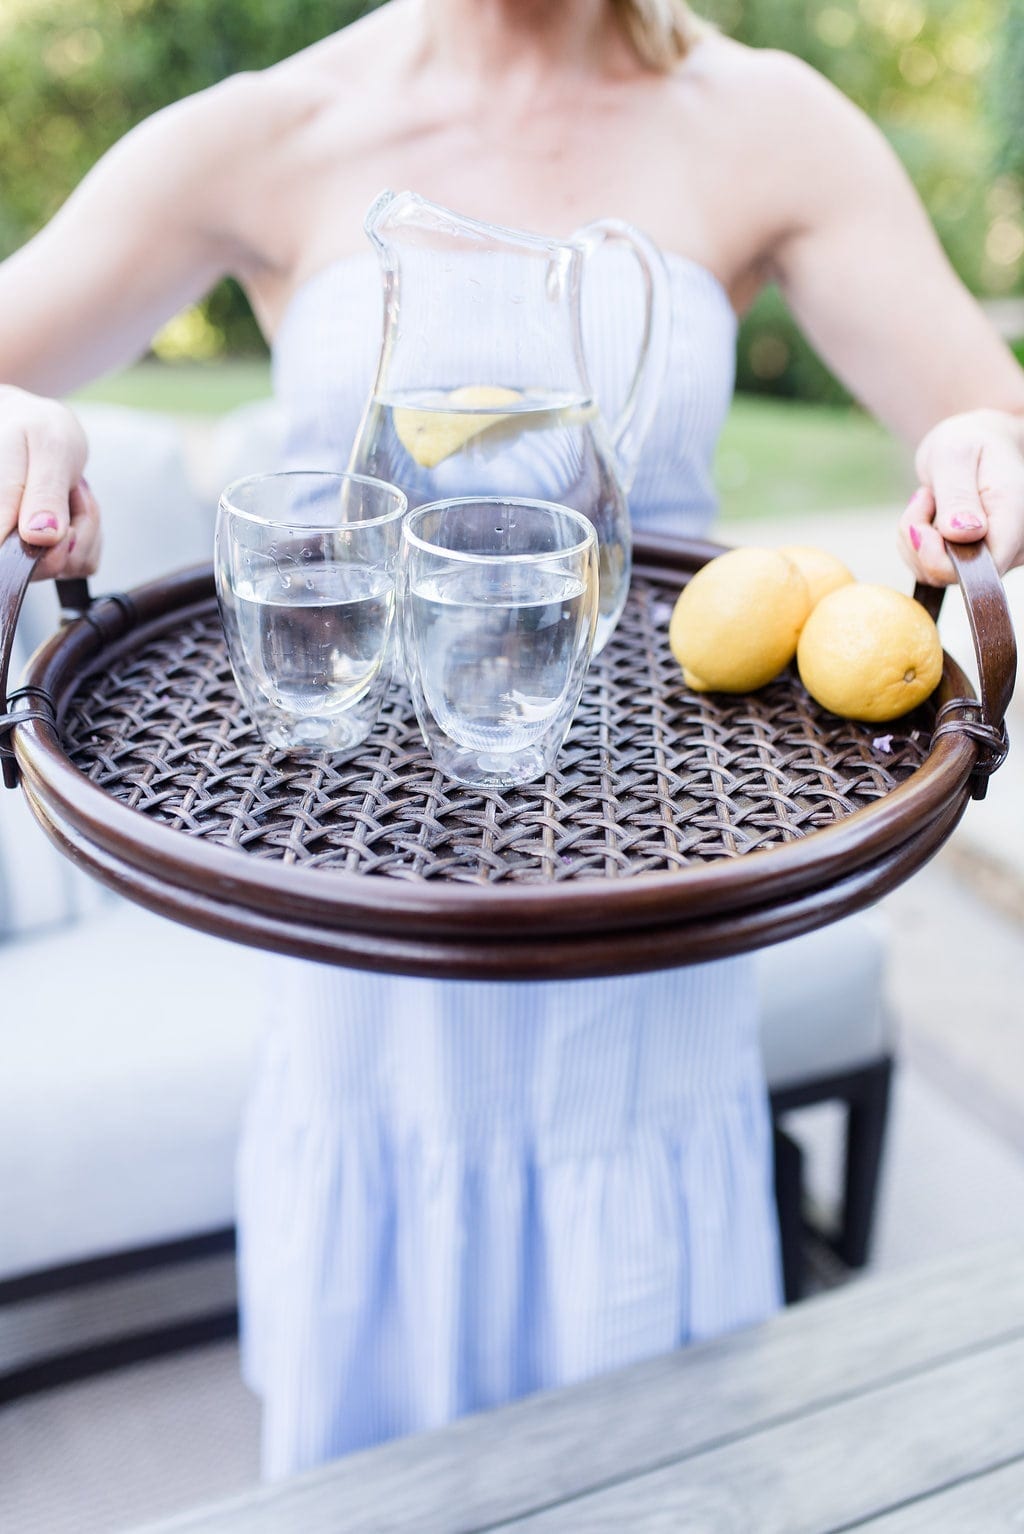 Threshold Tray from Target. Wood woven tray with lemons and glasses of water.